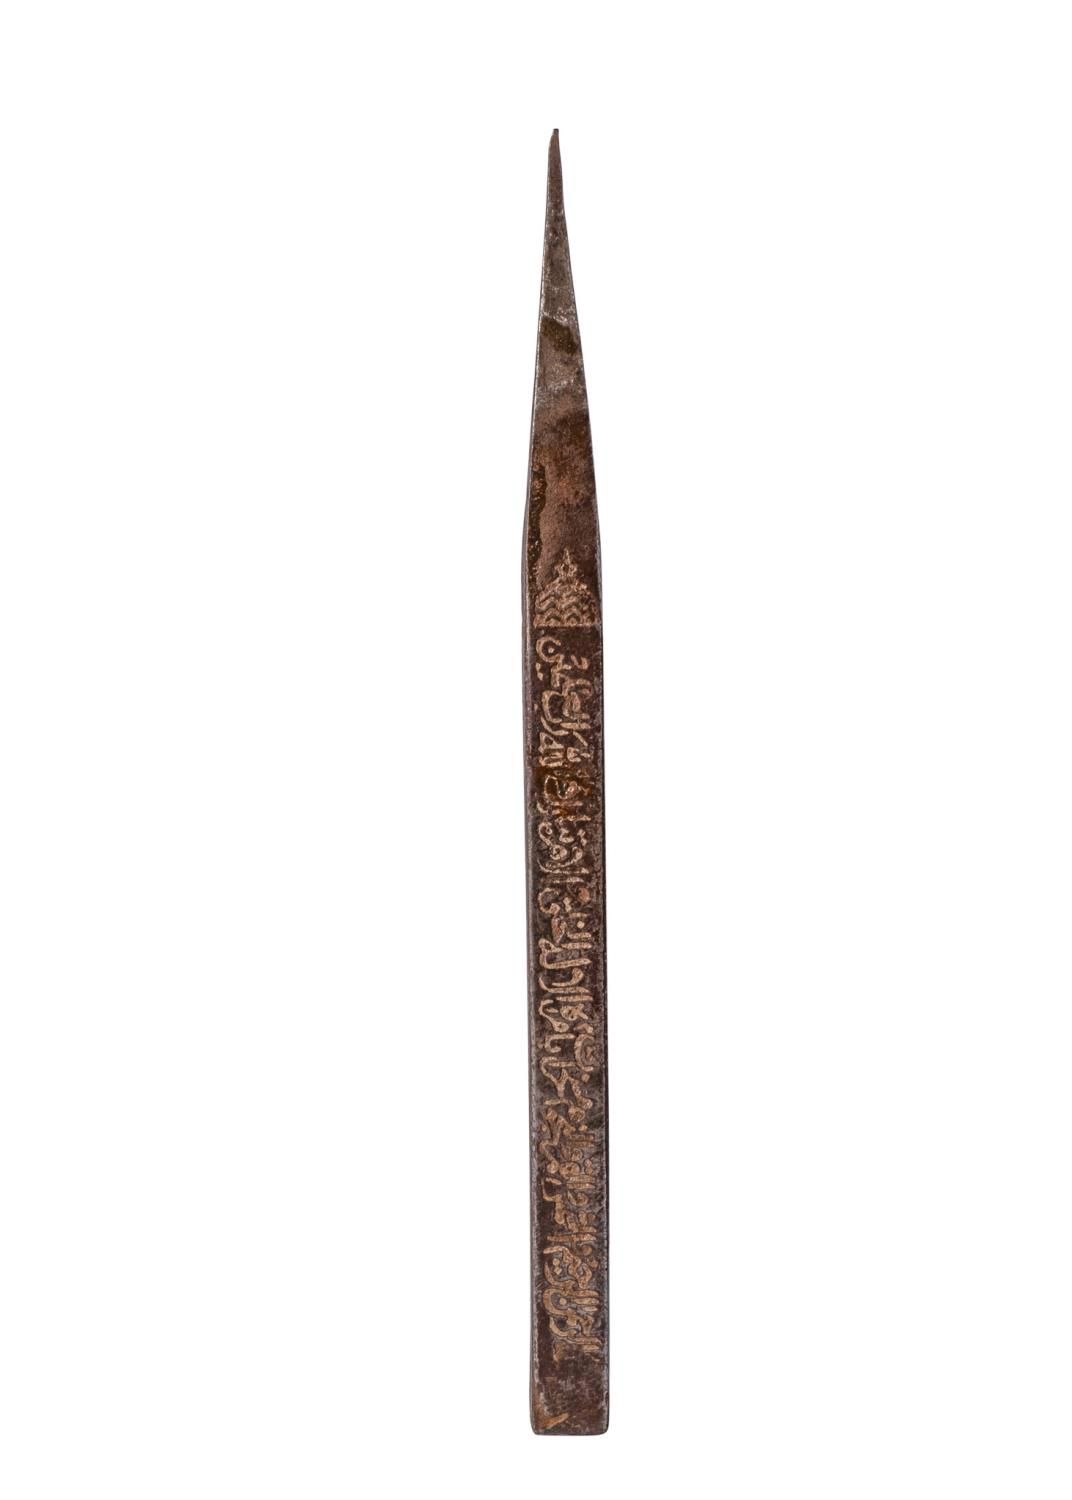 Null A HIGHLY IMPORTANT ISLAMIC KAABA ENGRAVED CALLIGRAPHIC PIN, 18TH/19TH CENTU&hellip;